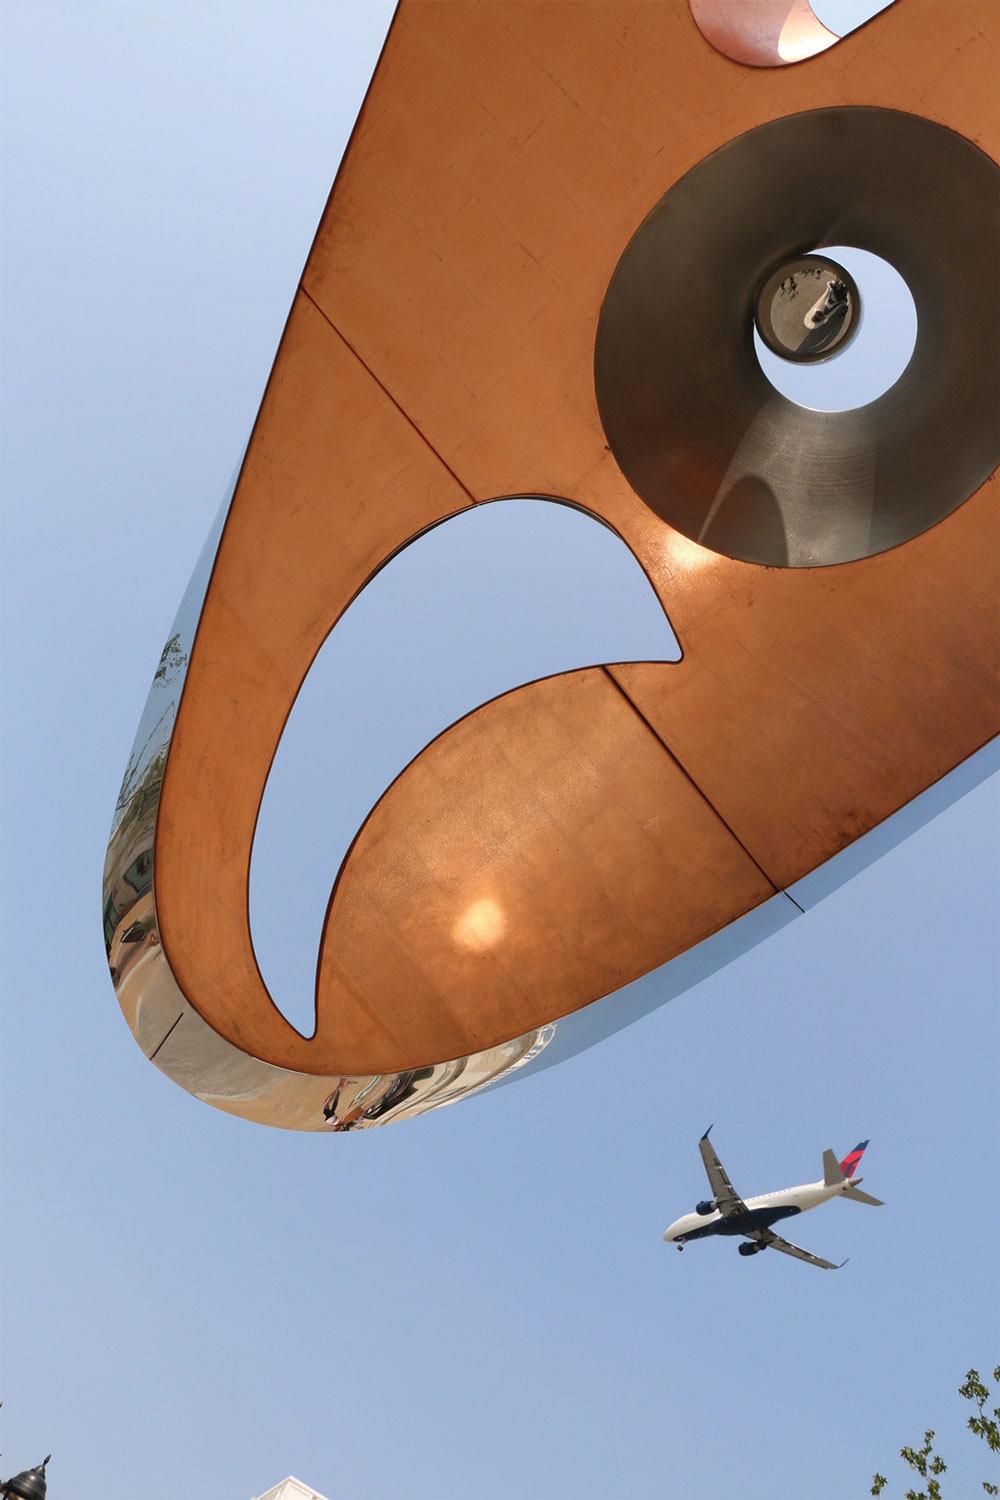 Sei sculpture watches plane pass overhead at Vancouver Airport.